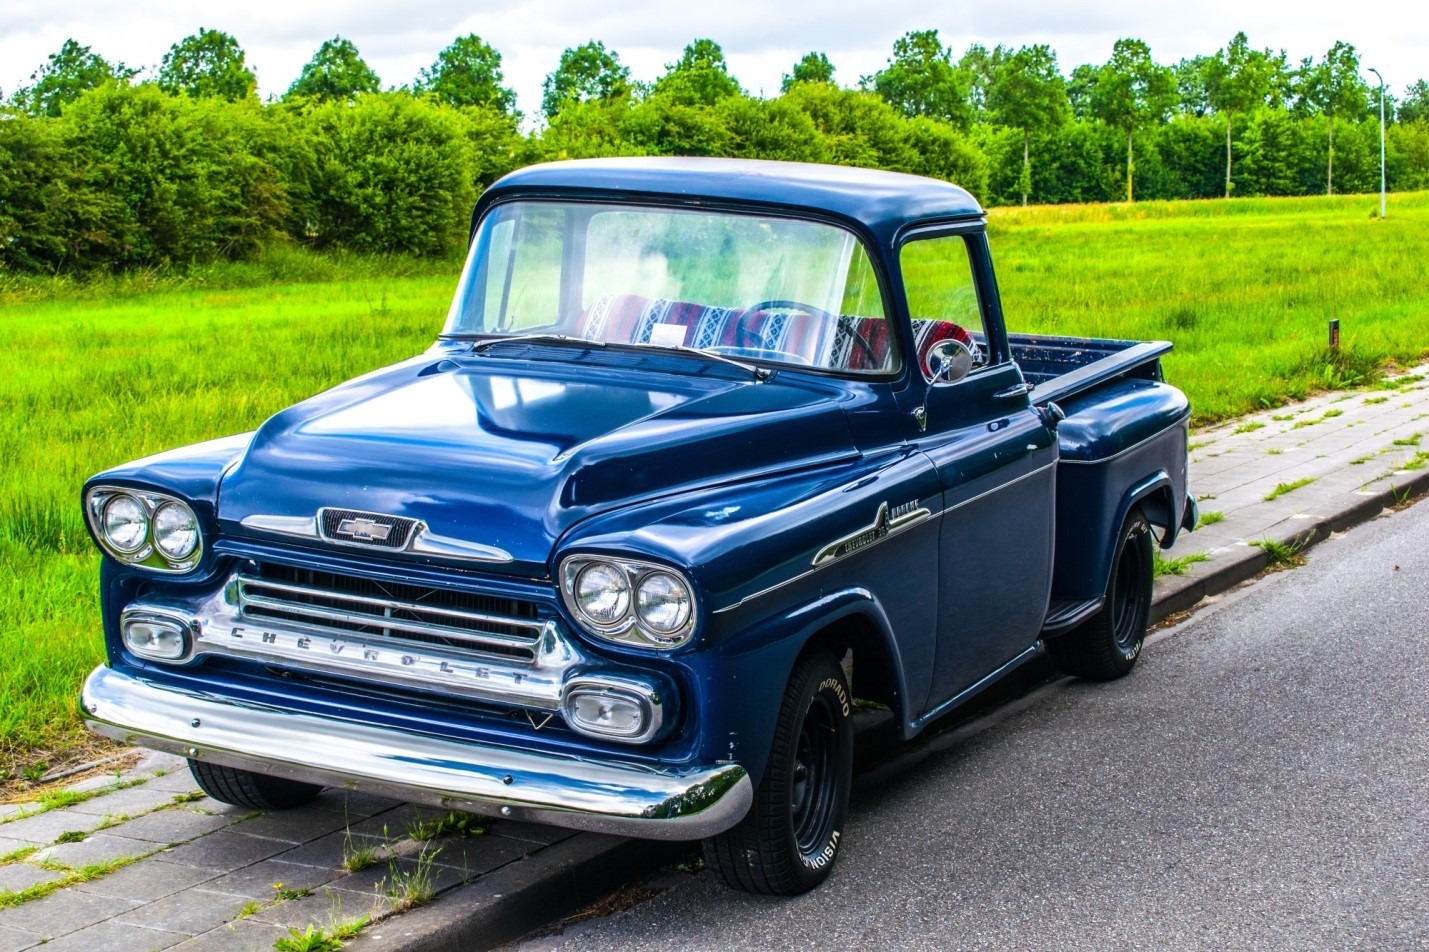 10 of the Greatest Classic Pickup Trucks Ever Built - Old Concept Cars